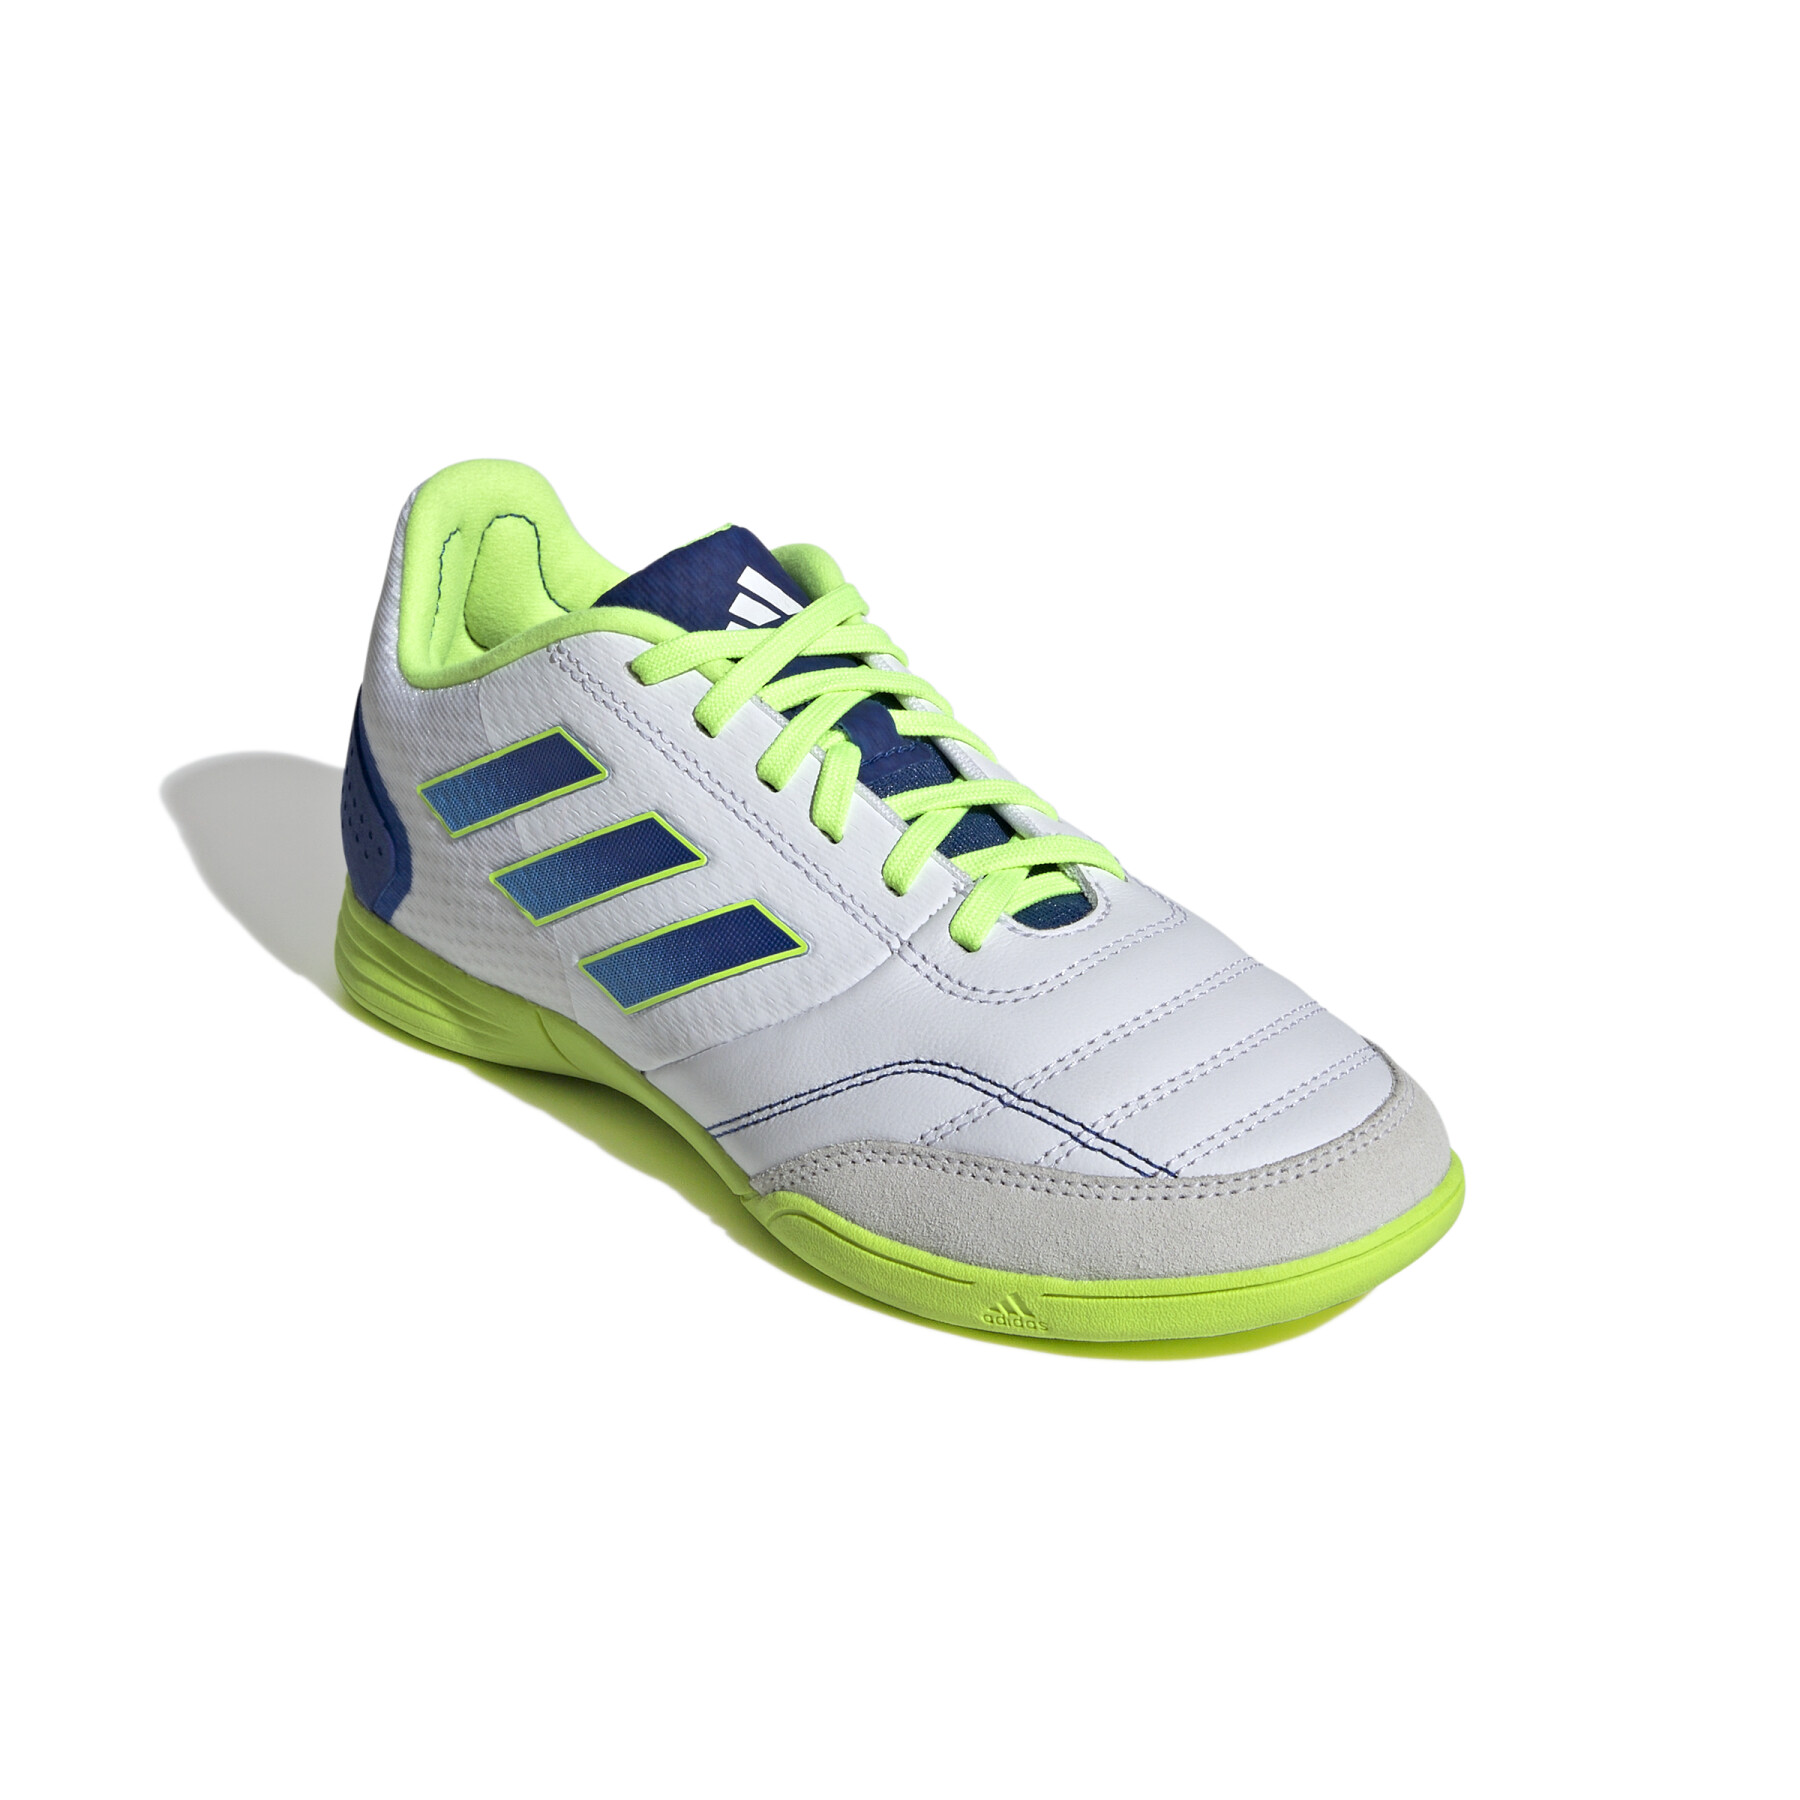 Chaussures de football enfant adidas Top Sala Competition Indoor